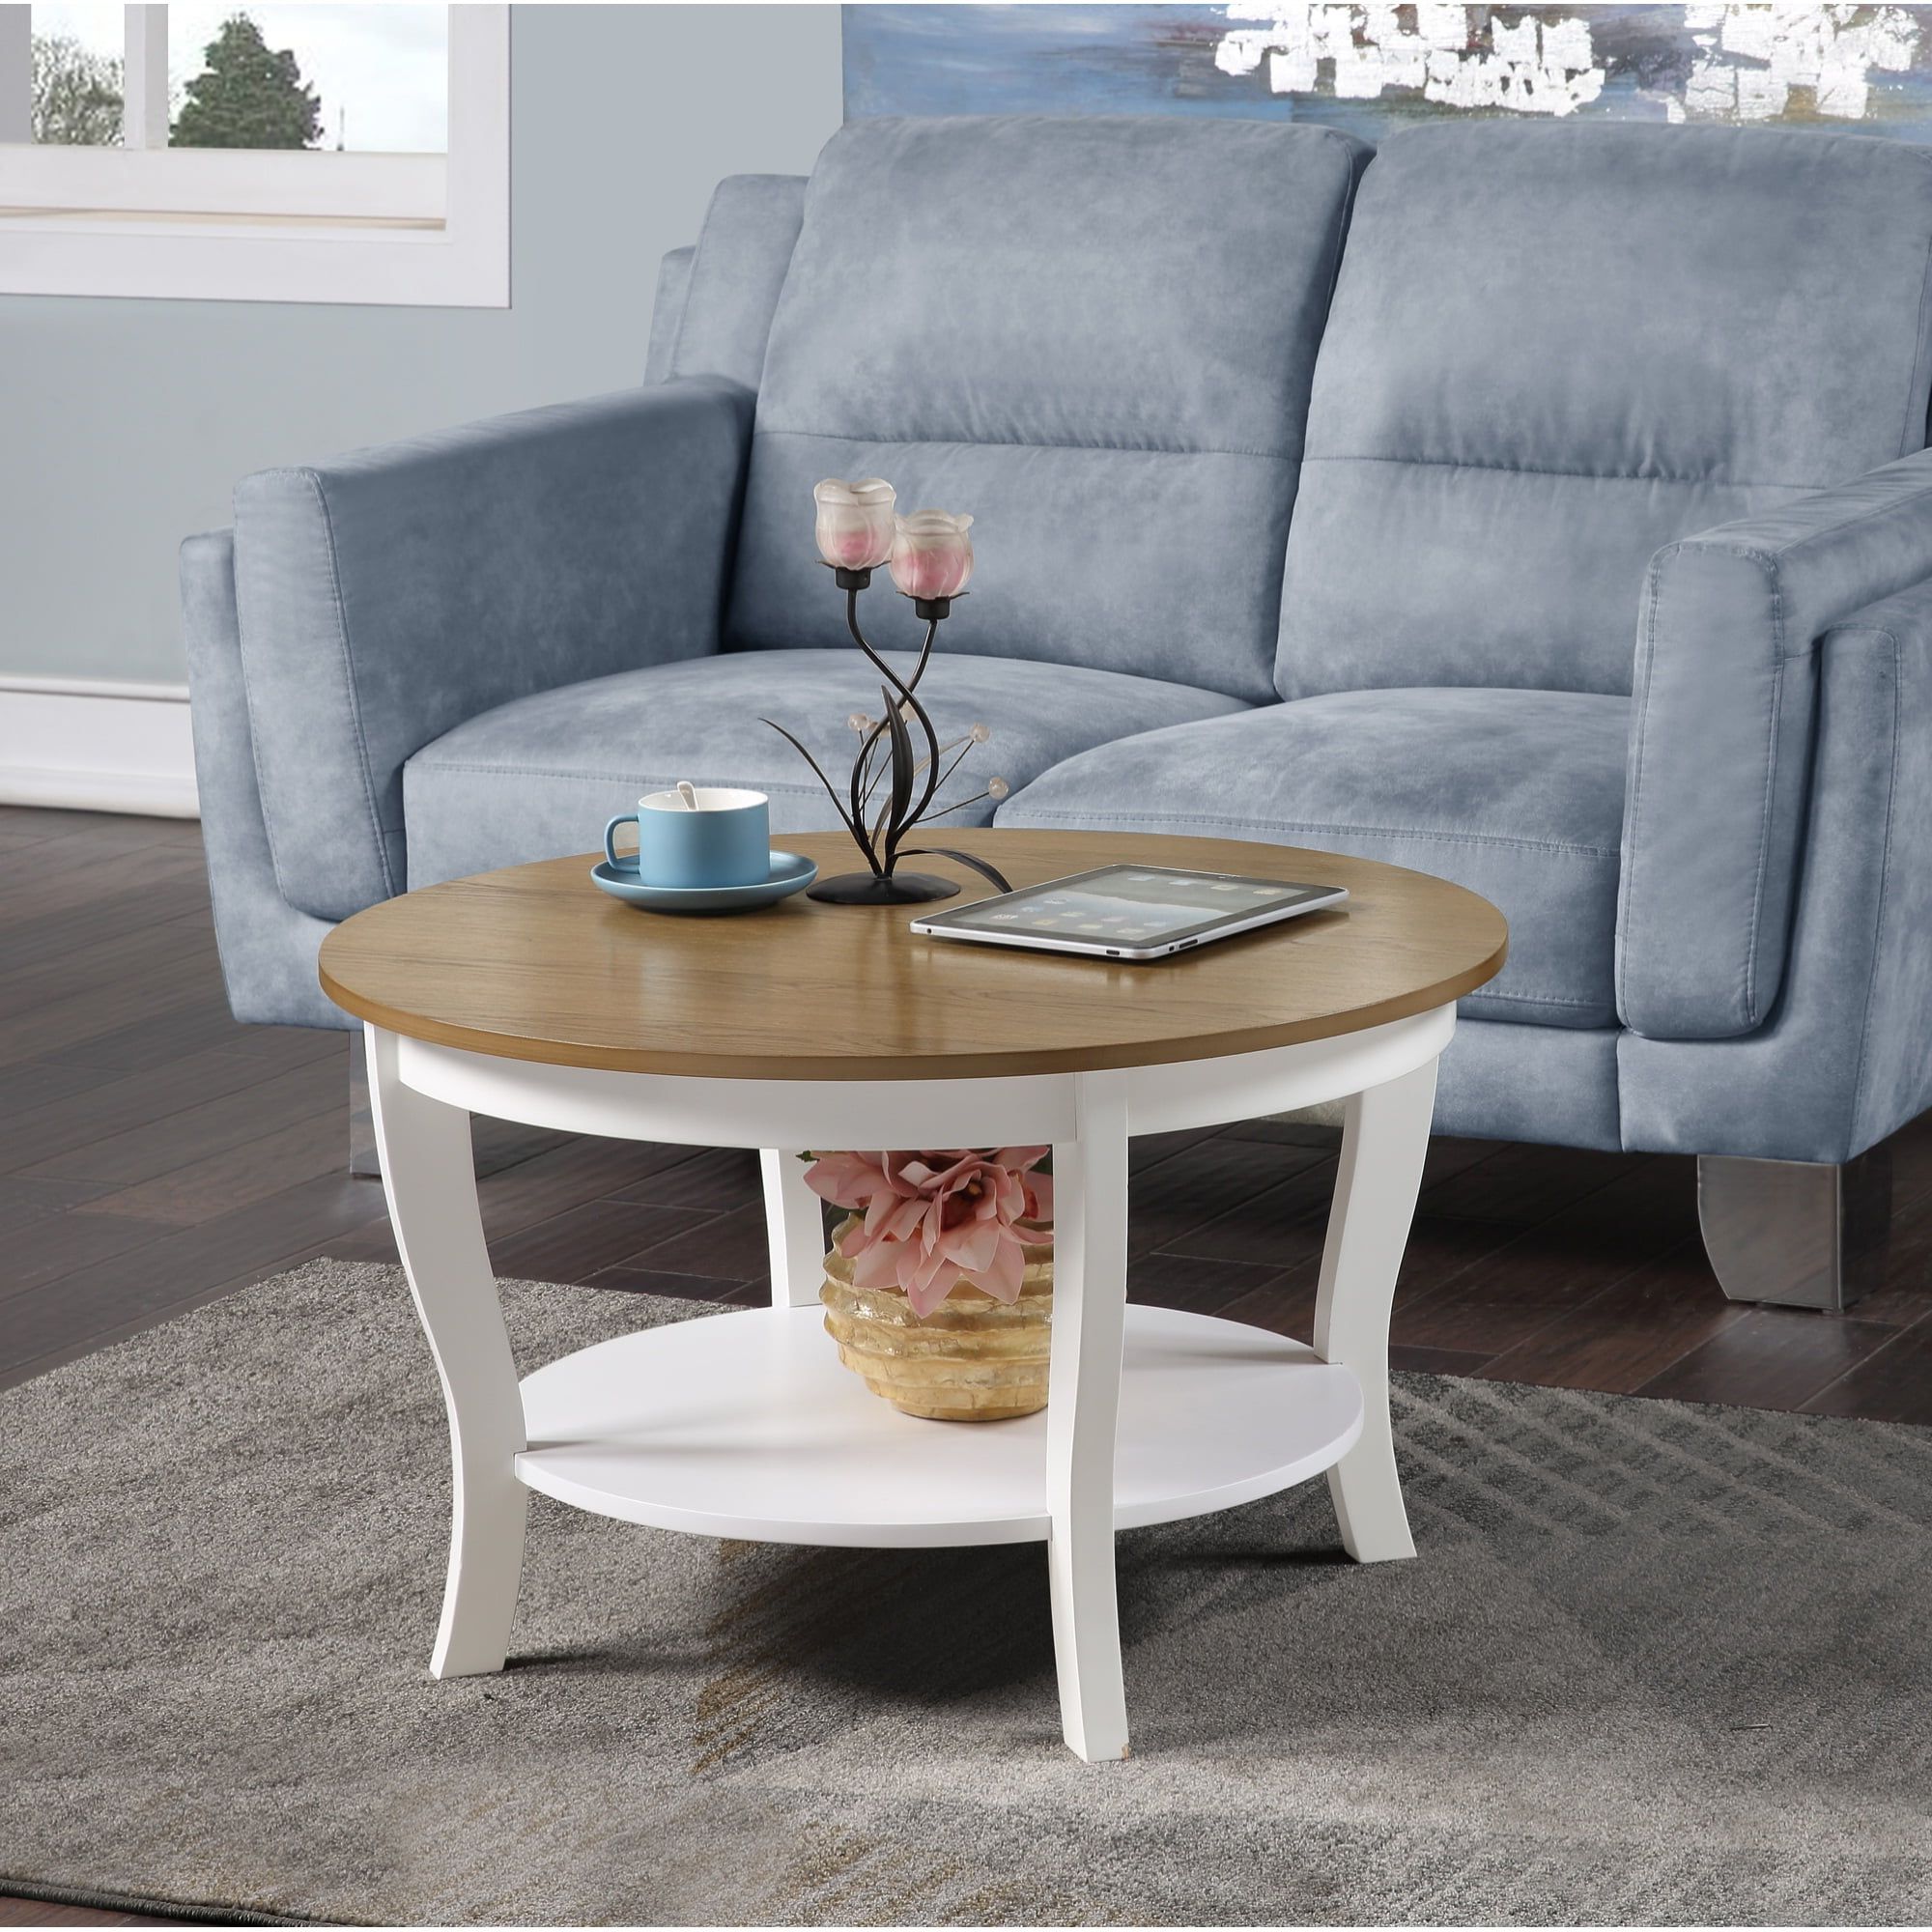 American Heritage Round Coffee Tables Regarding Best And Newest Convenience Concepts American Heritage Round Coffee Table With Shelf,  Driftwood/white – Walmart (View 5 of 10)